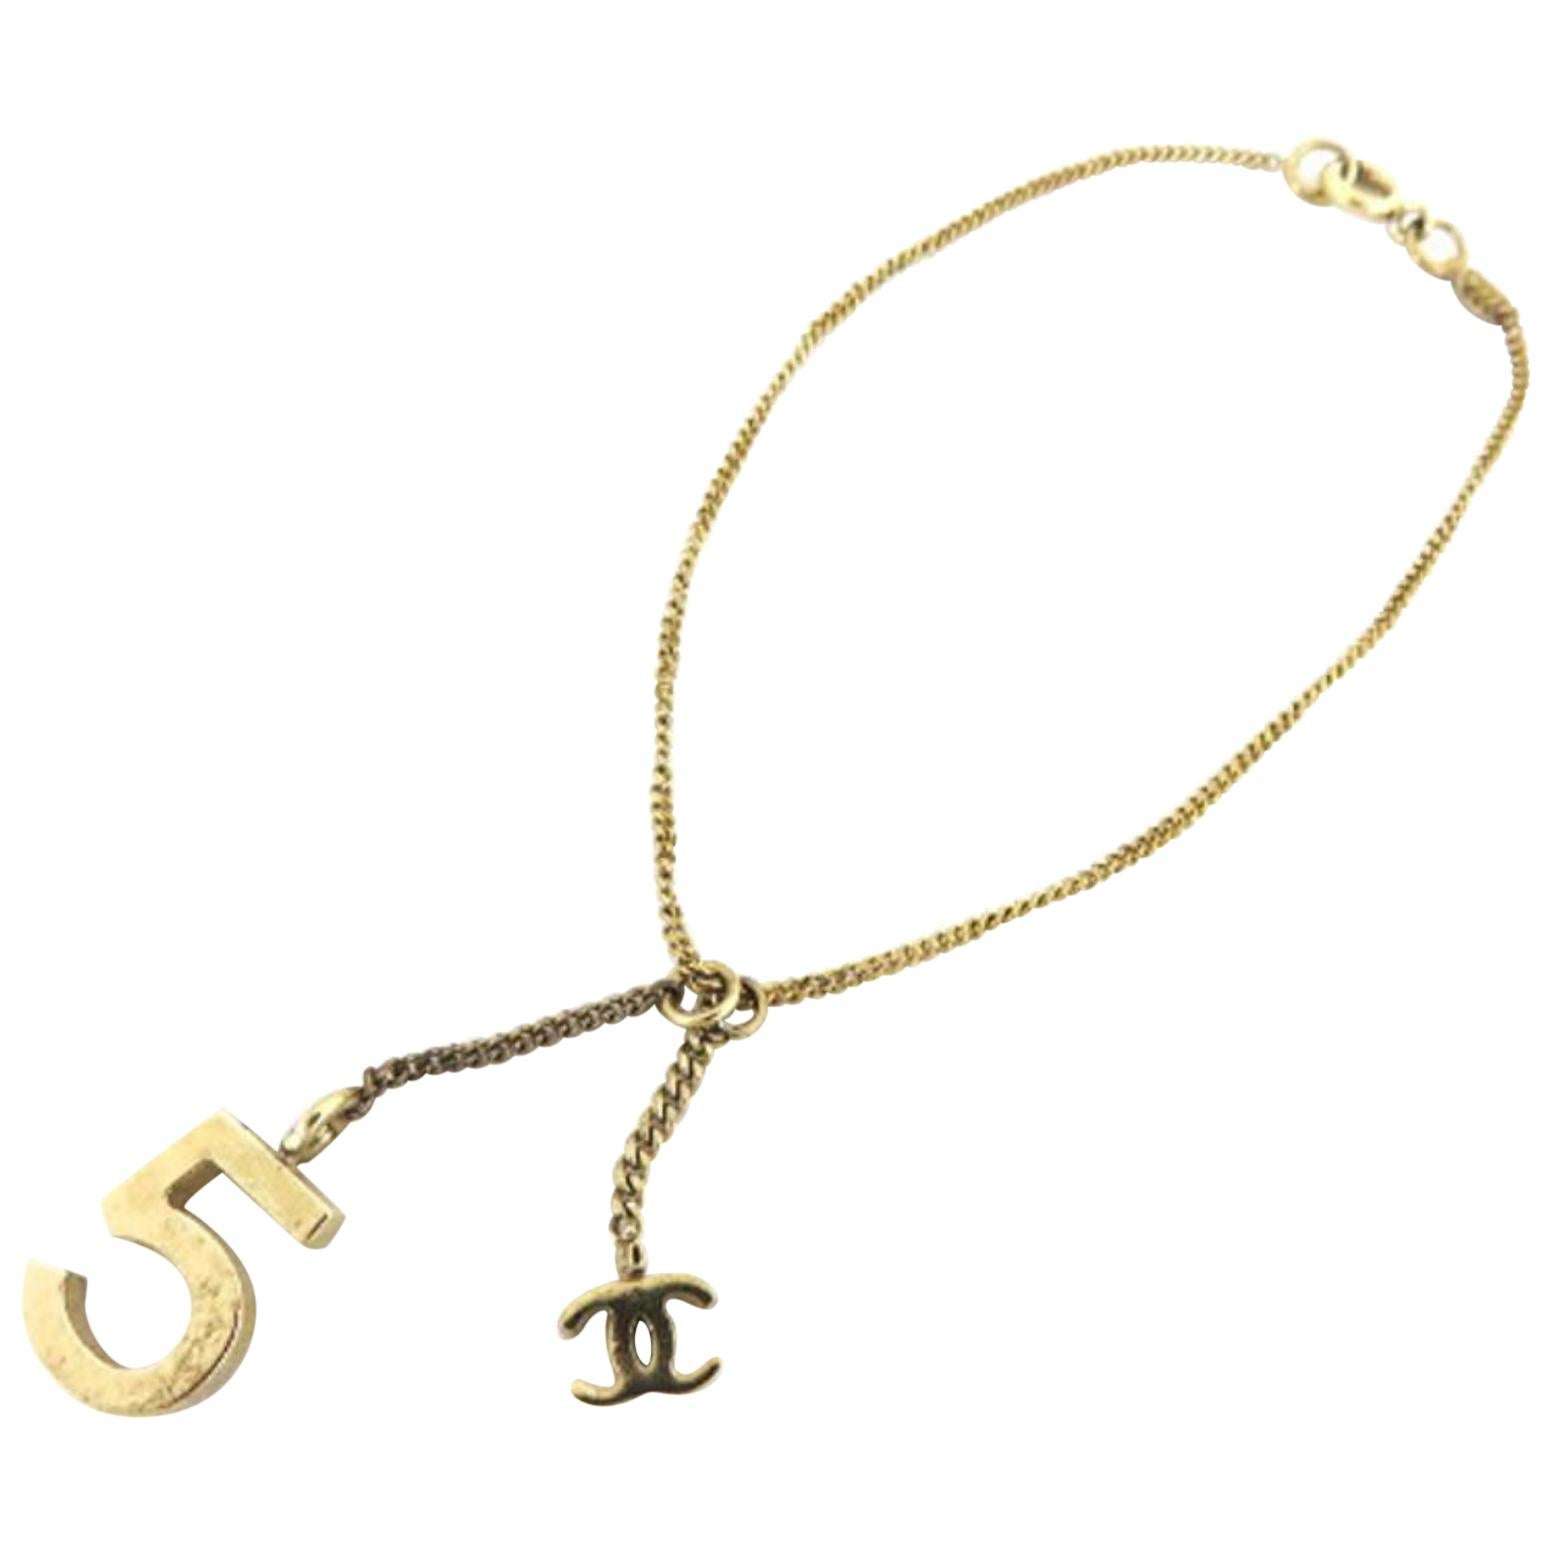 Chanel 5 Charm - For Sale on 1stDibs